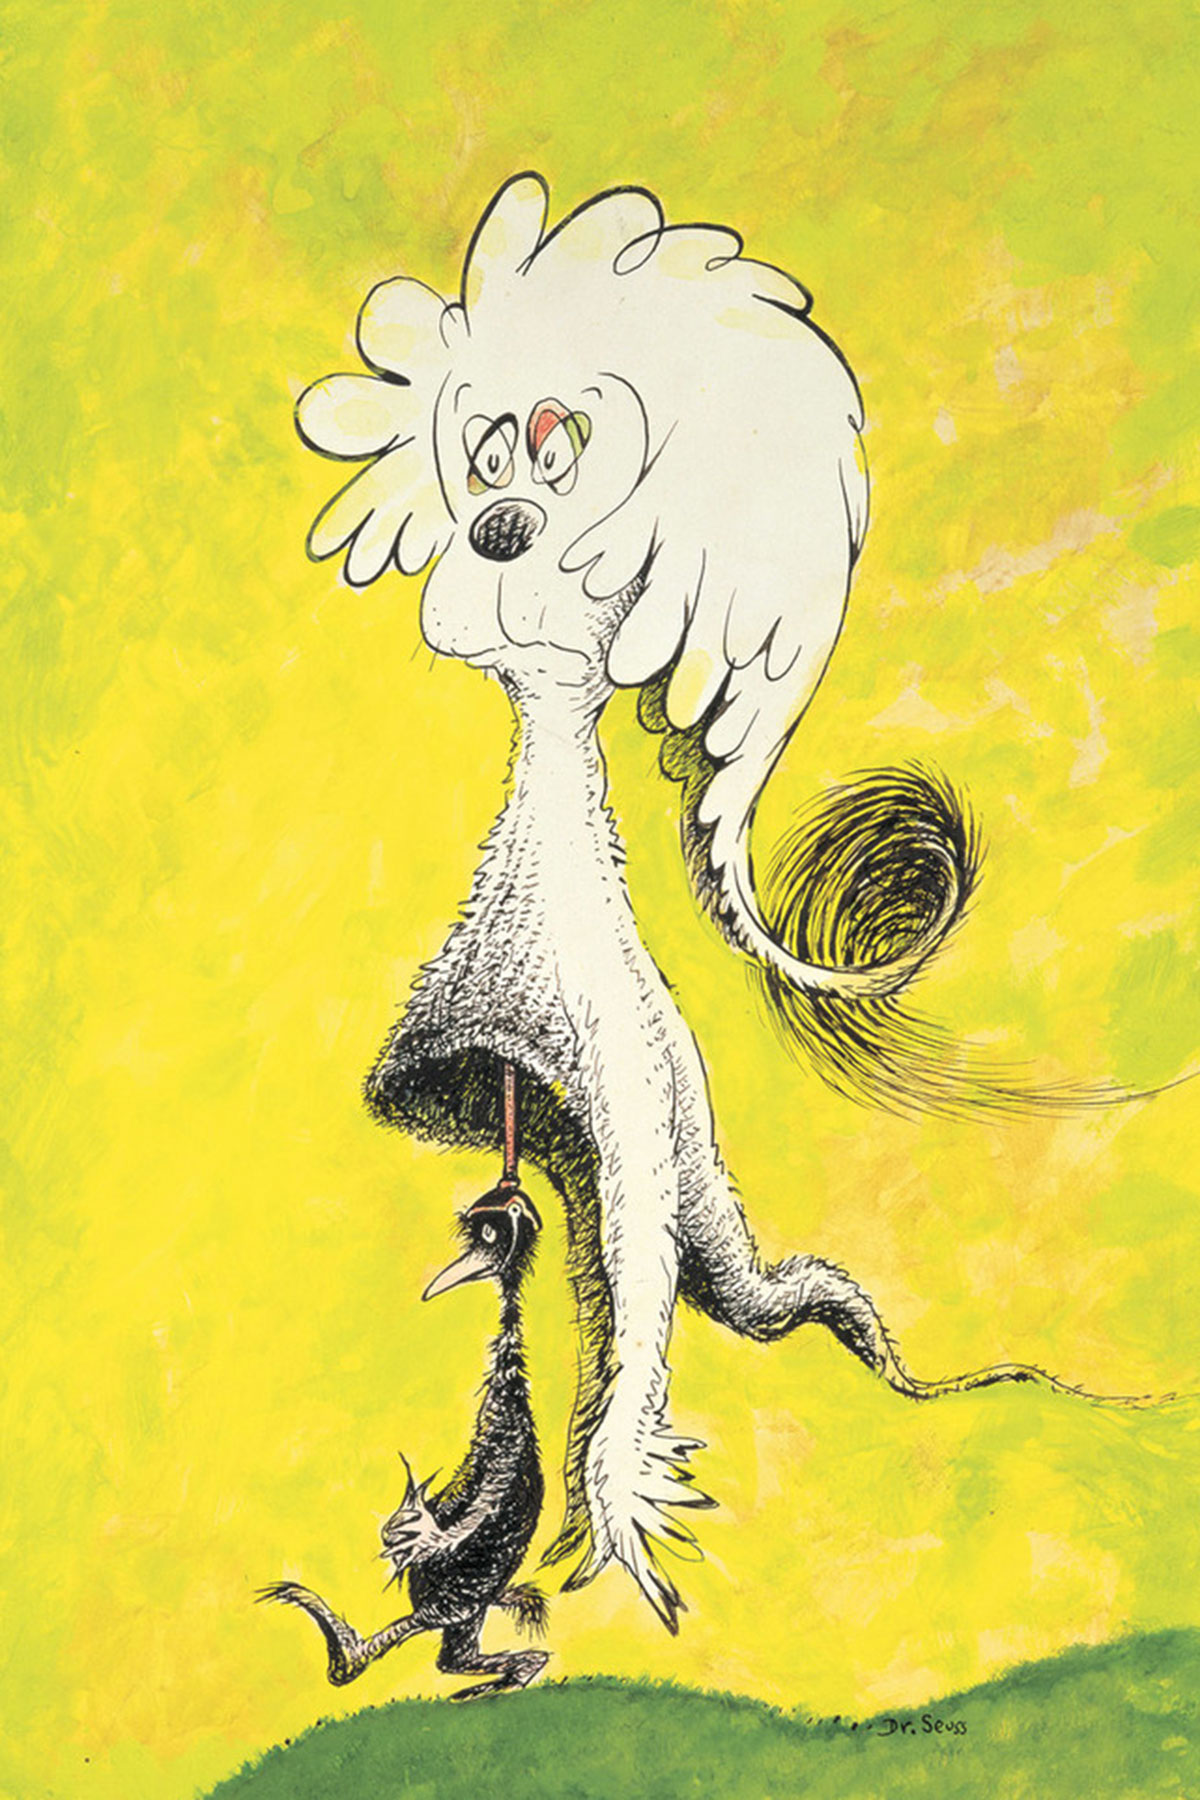 The Secret Art Of Dr Seuss Featured At Whitefish Bay Gallery